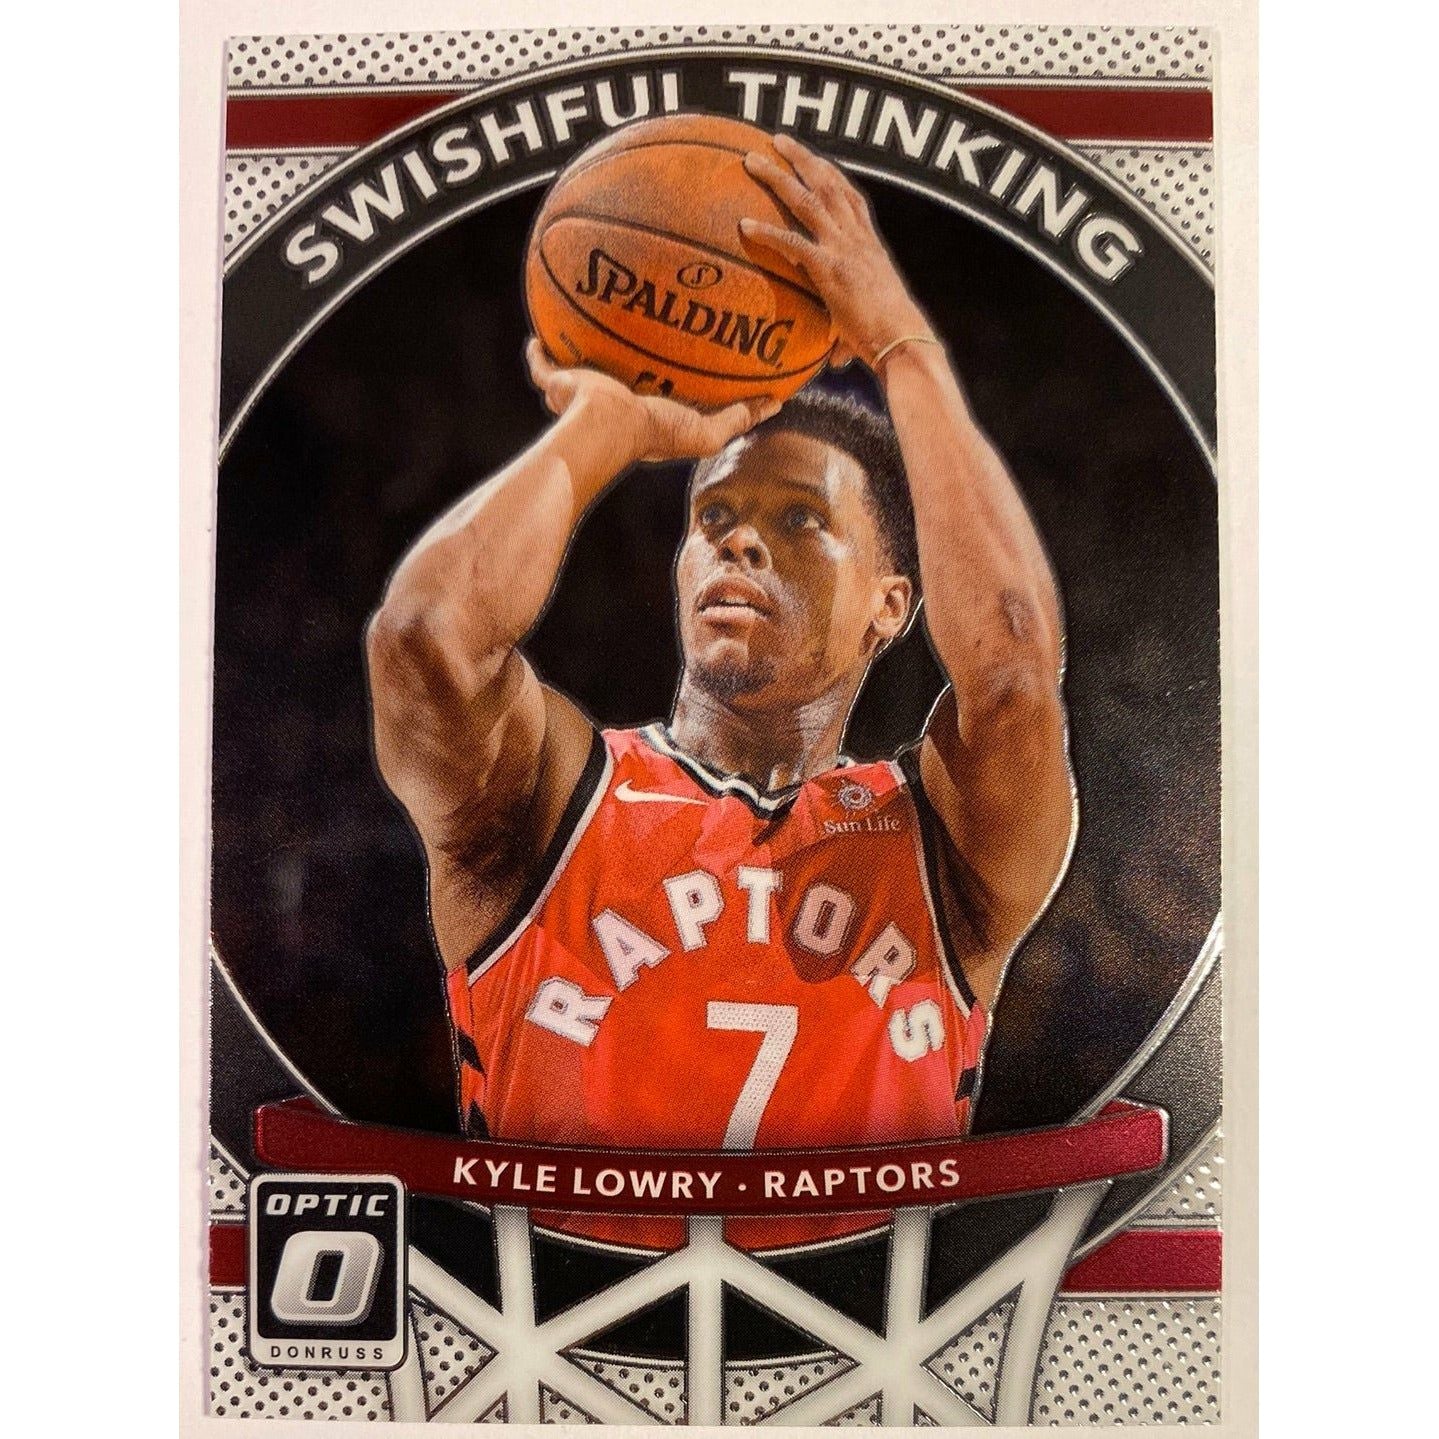  2017-18 Donruss Optic Kyle Lowry Swishful Thinking  Local Legends Cards & Collectibles